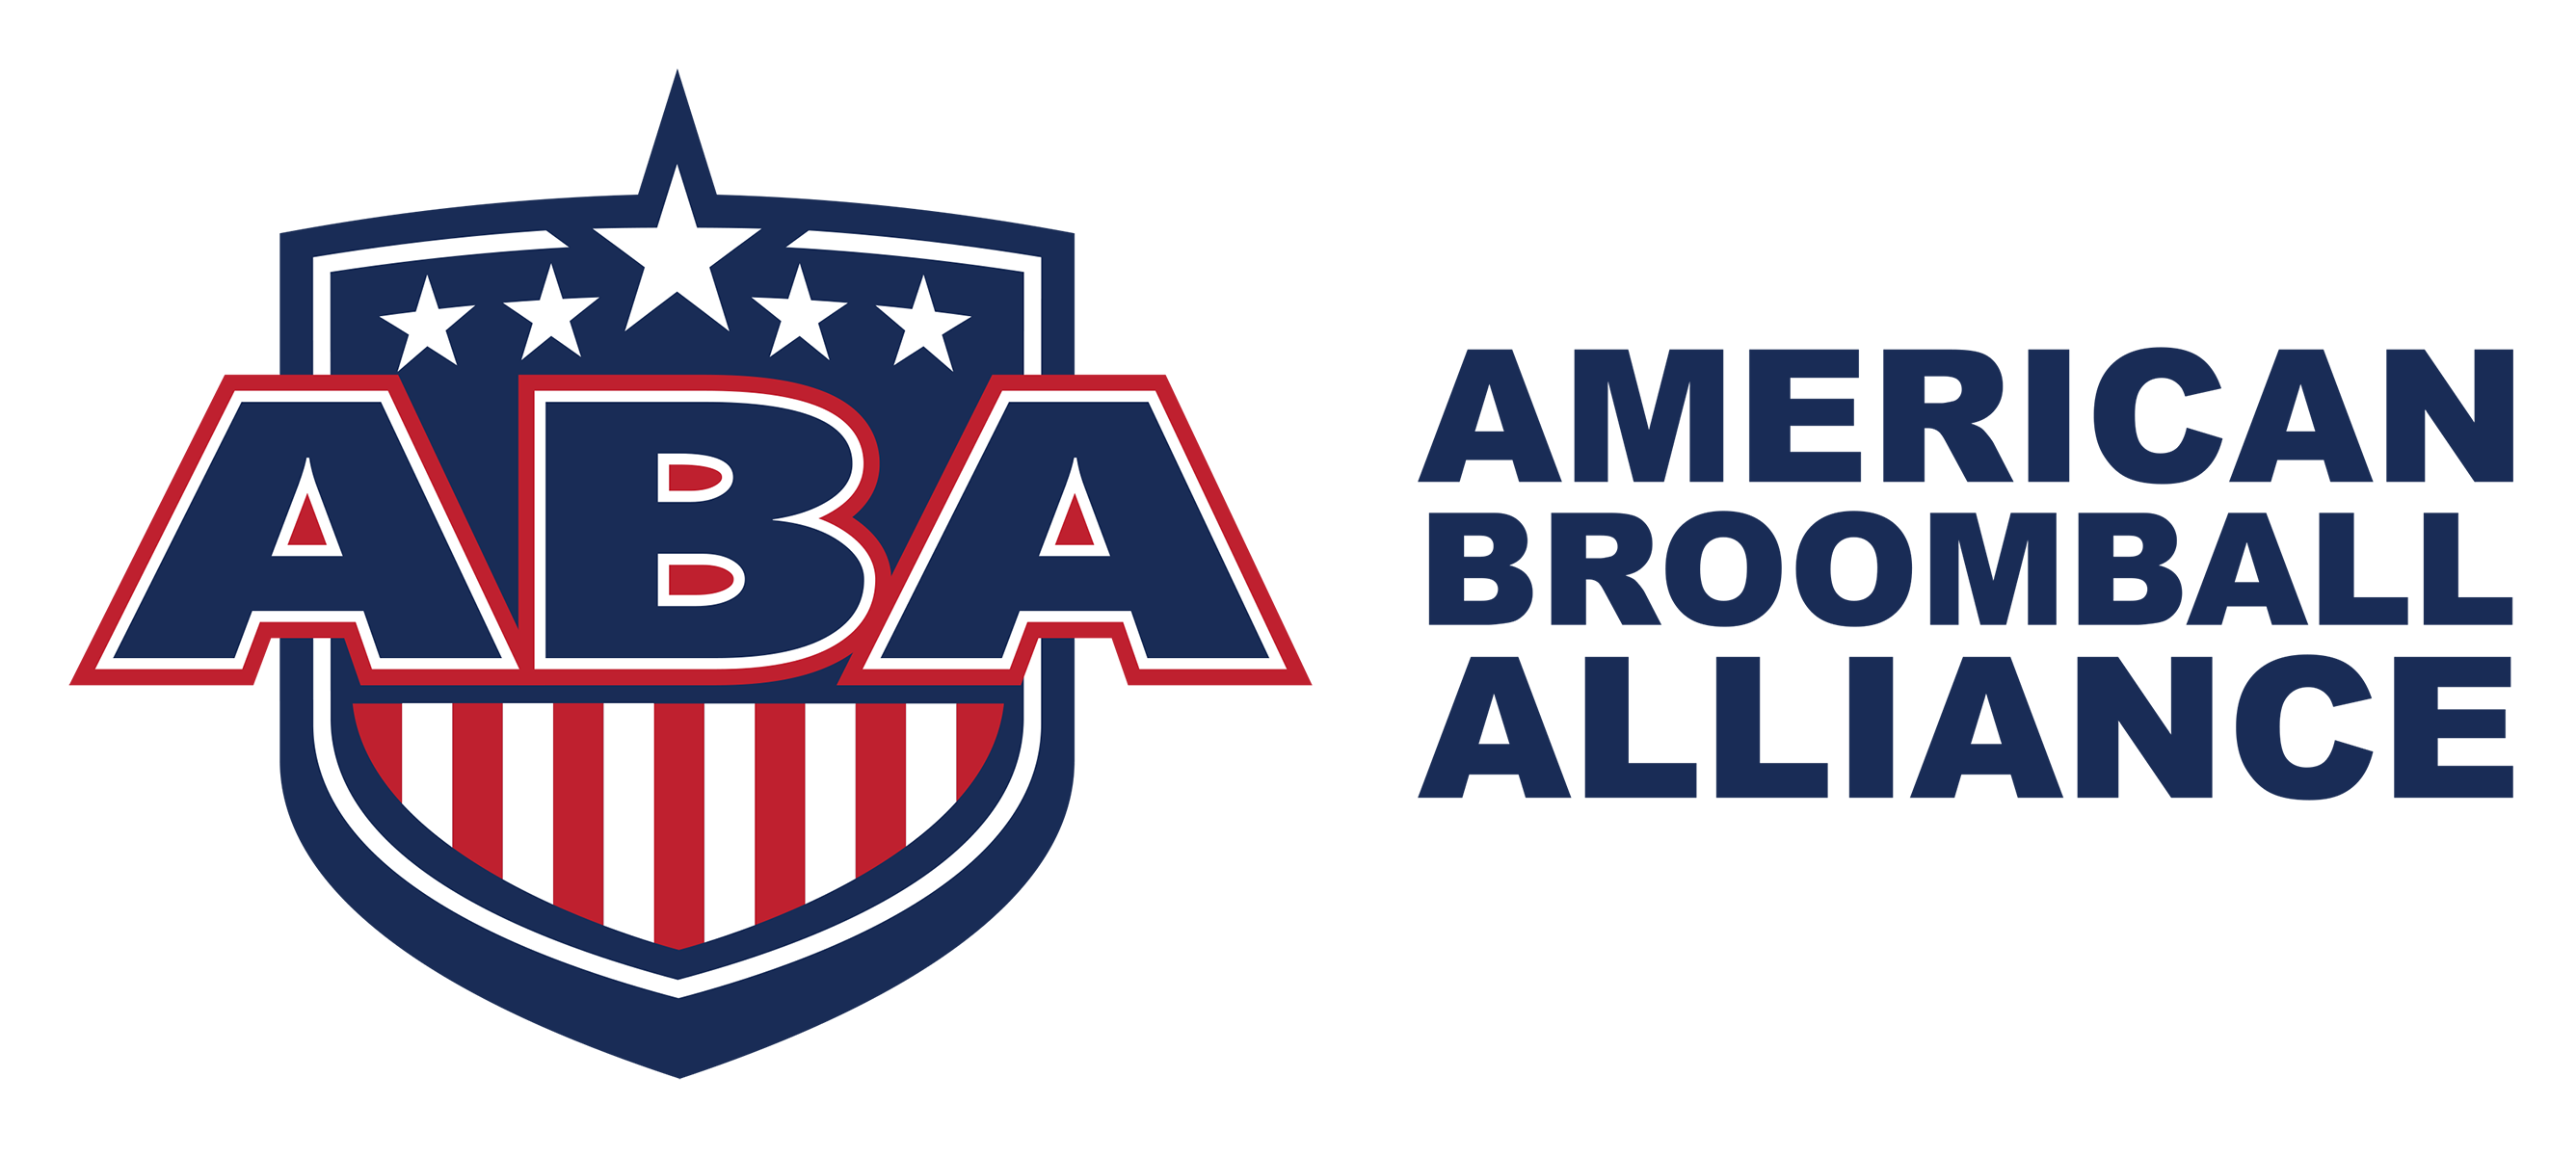 Logo of the american basketball association (aba) with a patriotic color scheme.